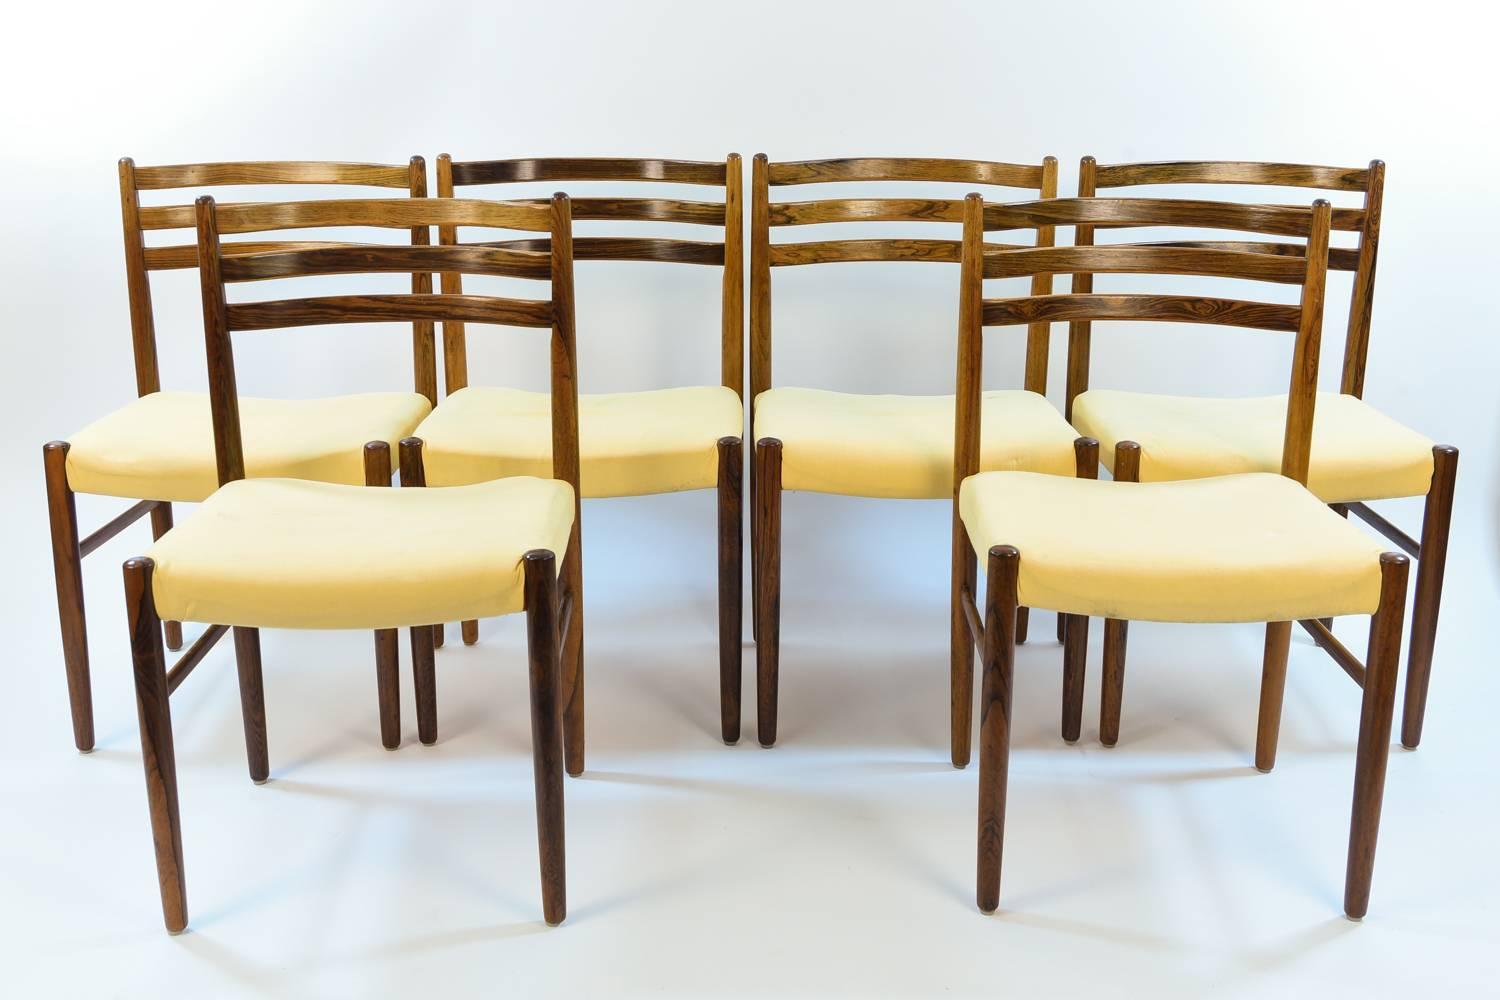 A wonderful set of six Danish midcentury side chairs featuring rosewood frames. Would be a great dining set.